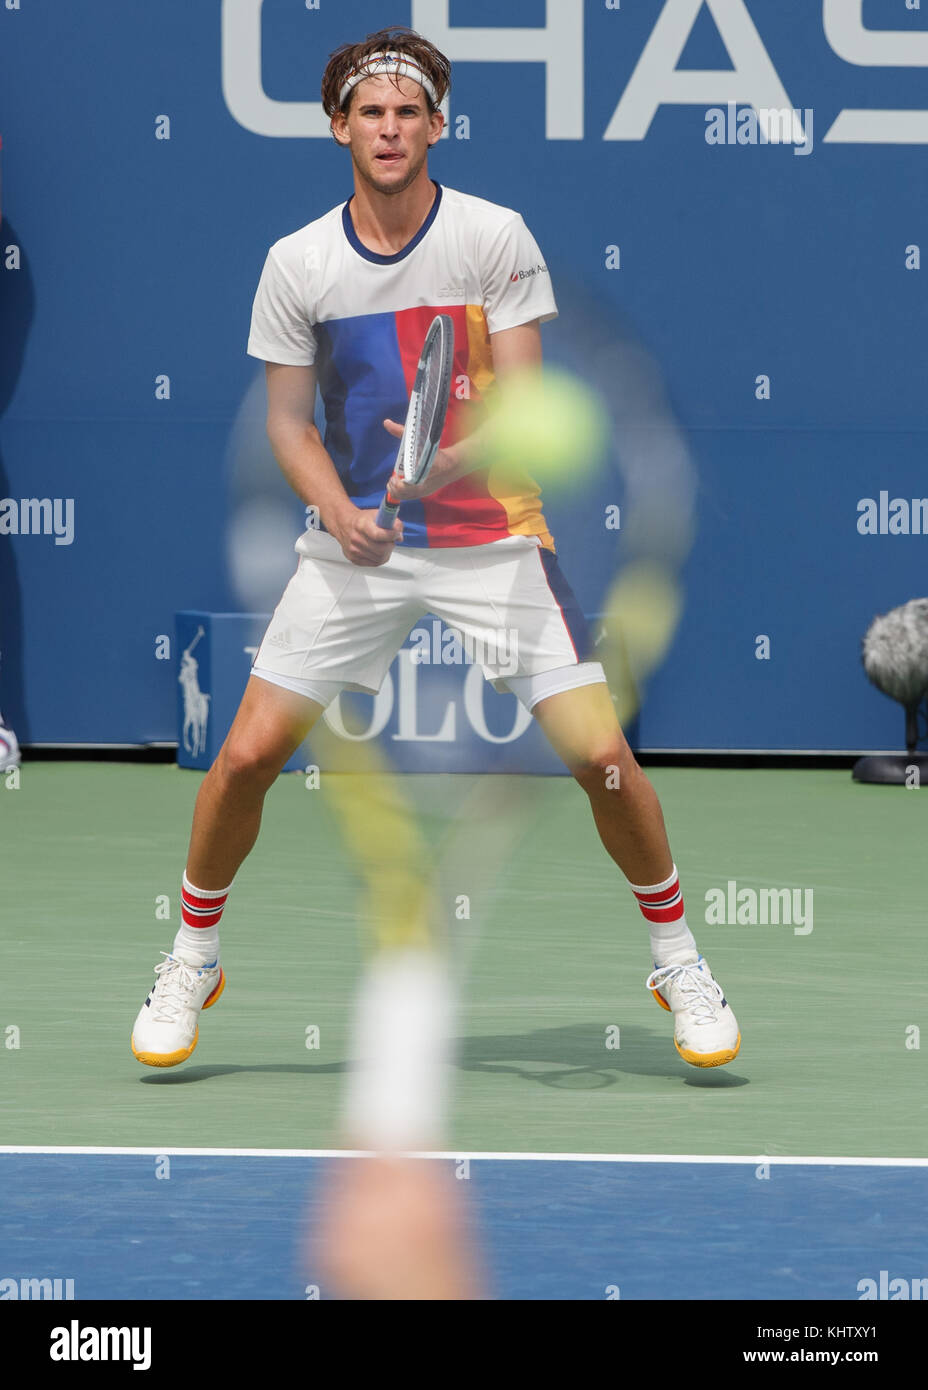 Austrian tennis player DOMINIC THIEM (AUT) waiting for serve at US Open 2017 Tennis Championship, New York City, New York State, United States. Stock Photo